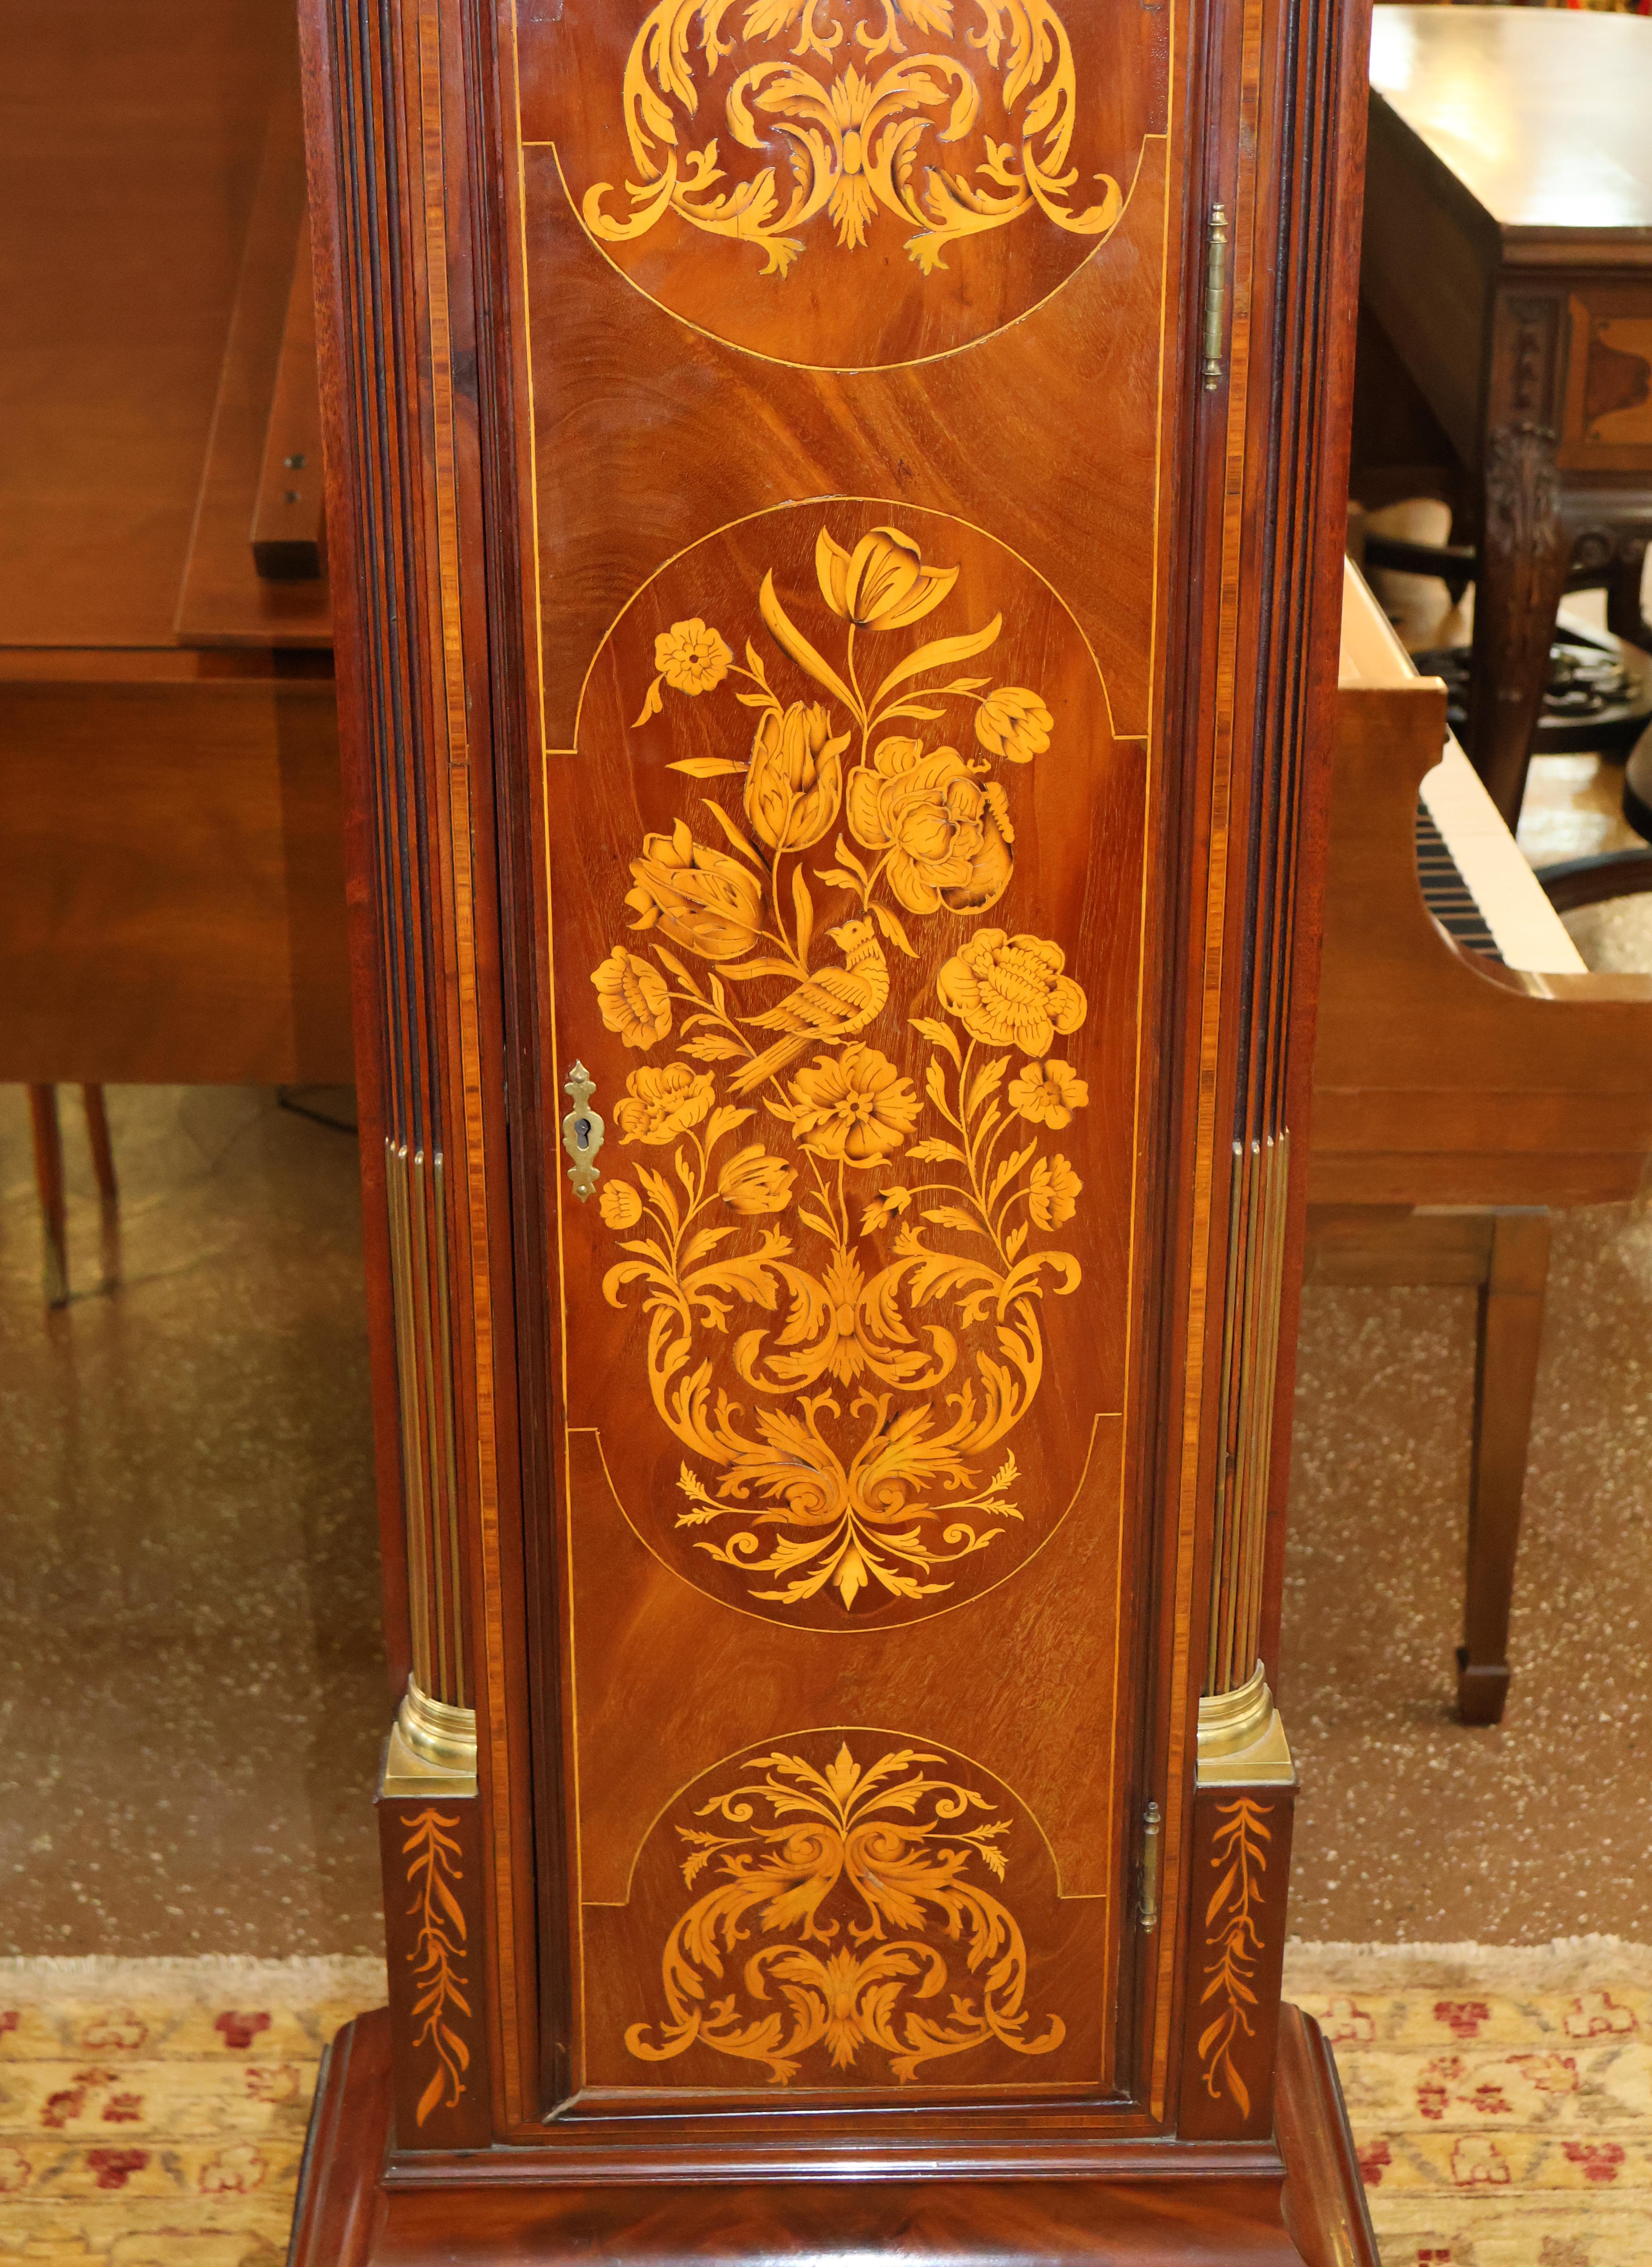 Herbert Blockley London Musical 19th Century Inlaid Tall Case Grandfather Clock For Sale 5